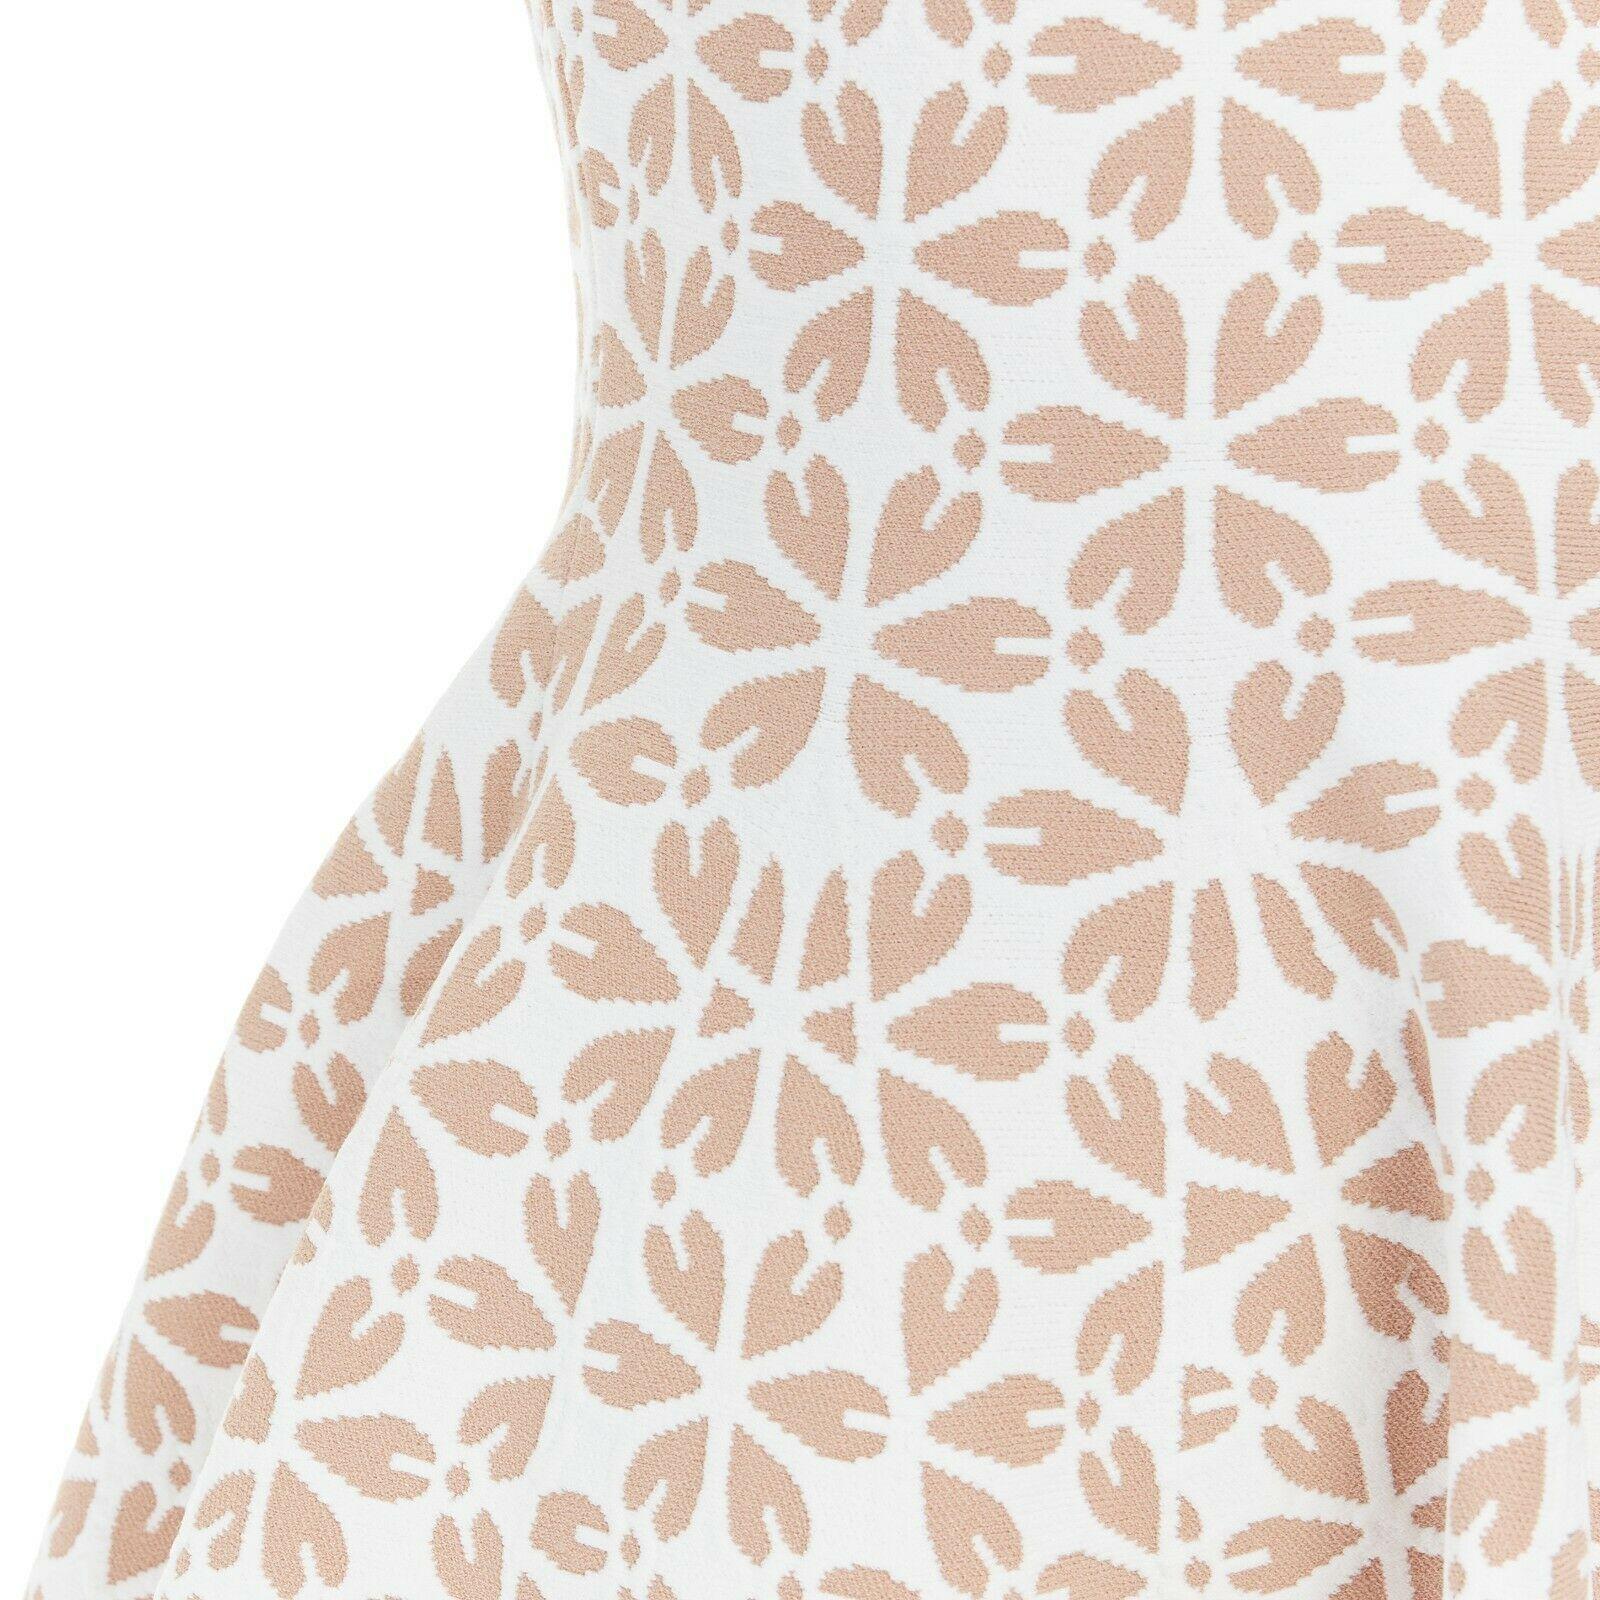 ALEXANDER MCQUEEN white nude geomtric leaf pattern jacquard fit flare dress M 4